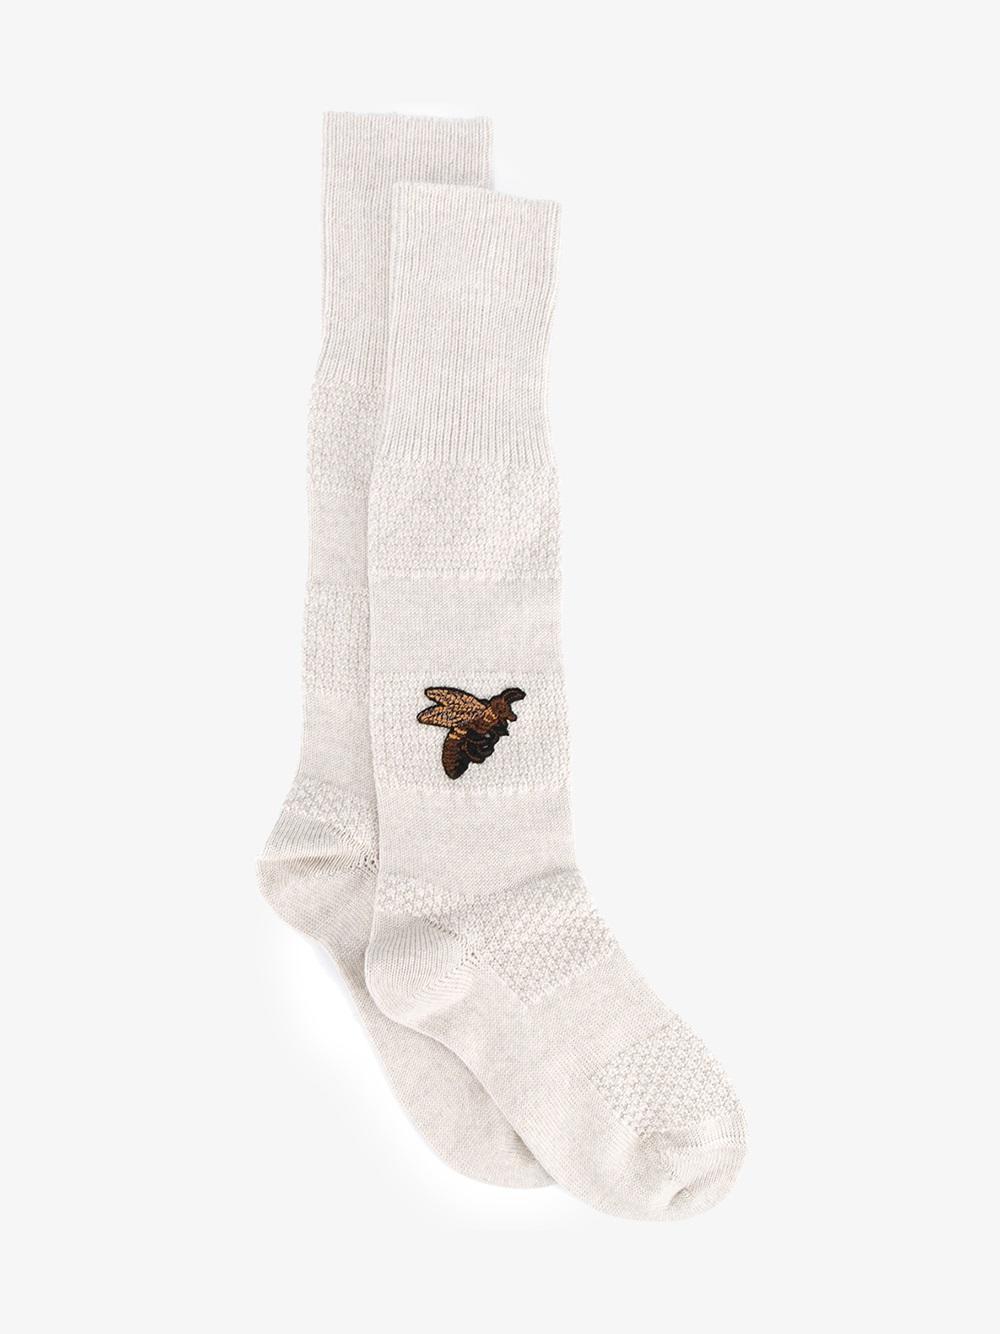 Lyst - Gucci Bumble Bee Embroidered Socks